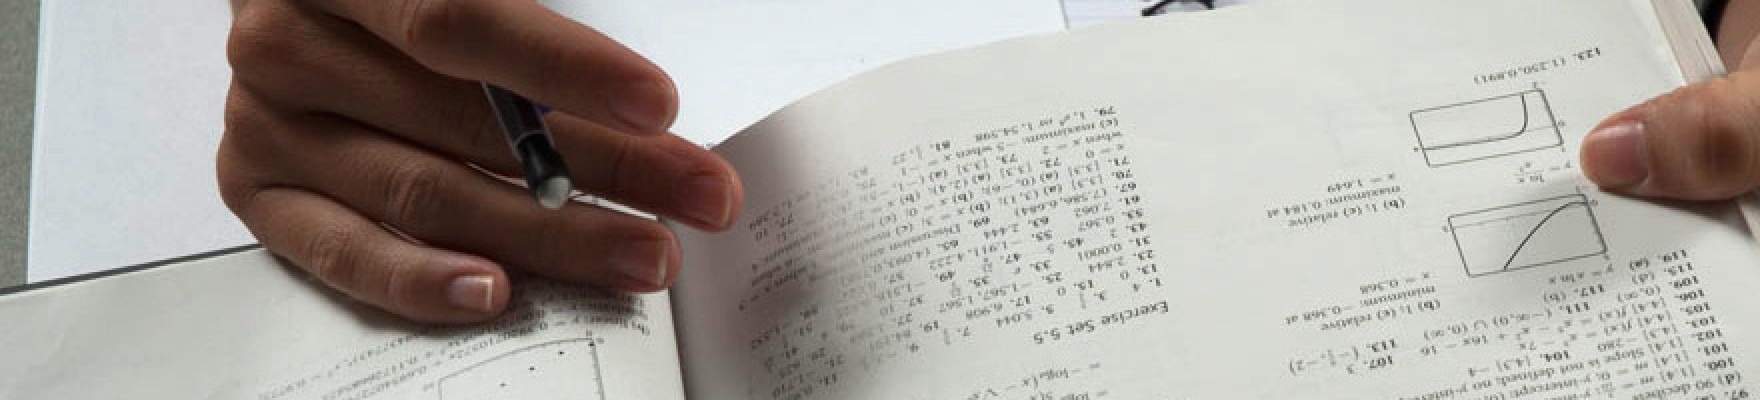 Close up of student's hands holding a math textbook open.